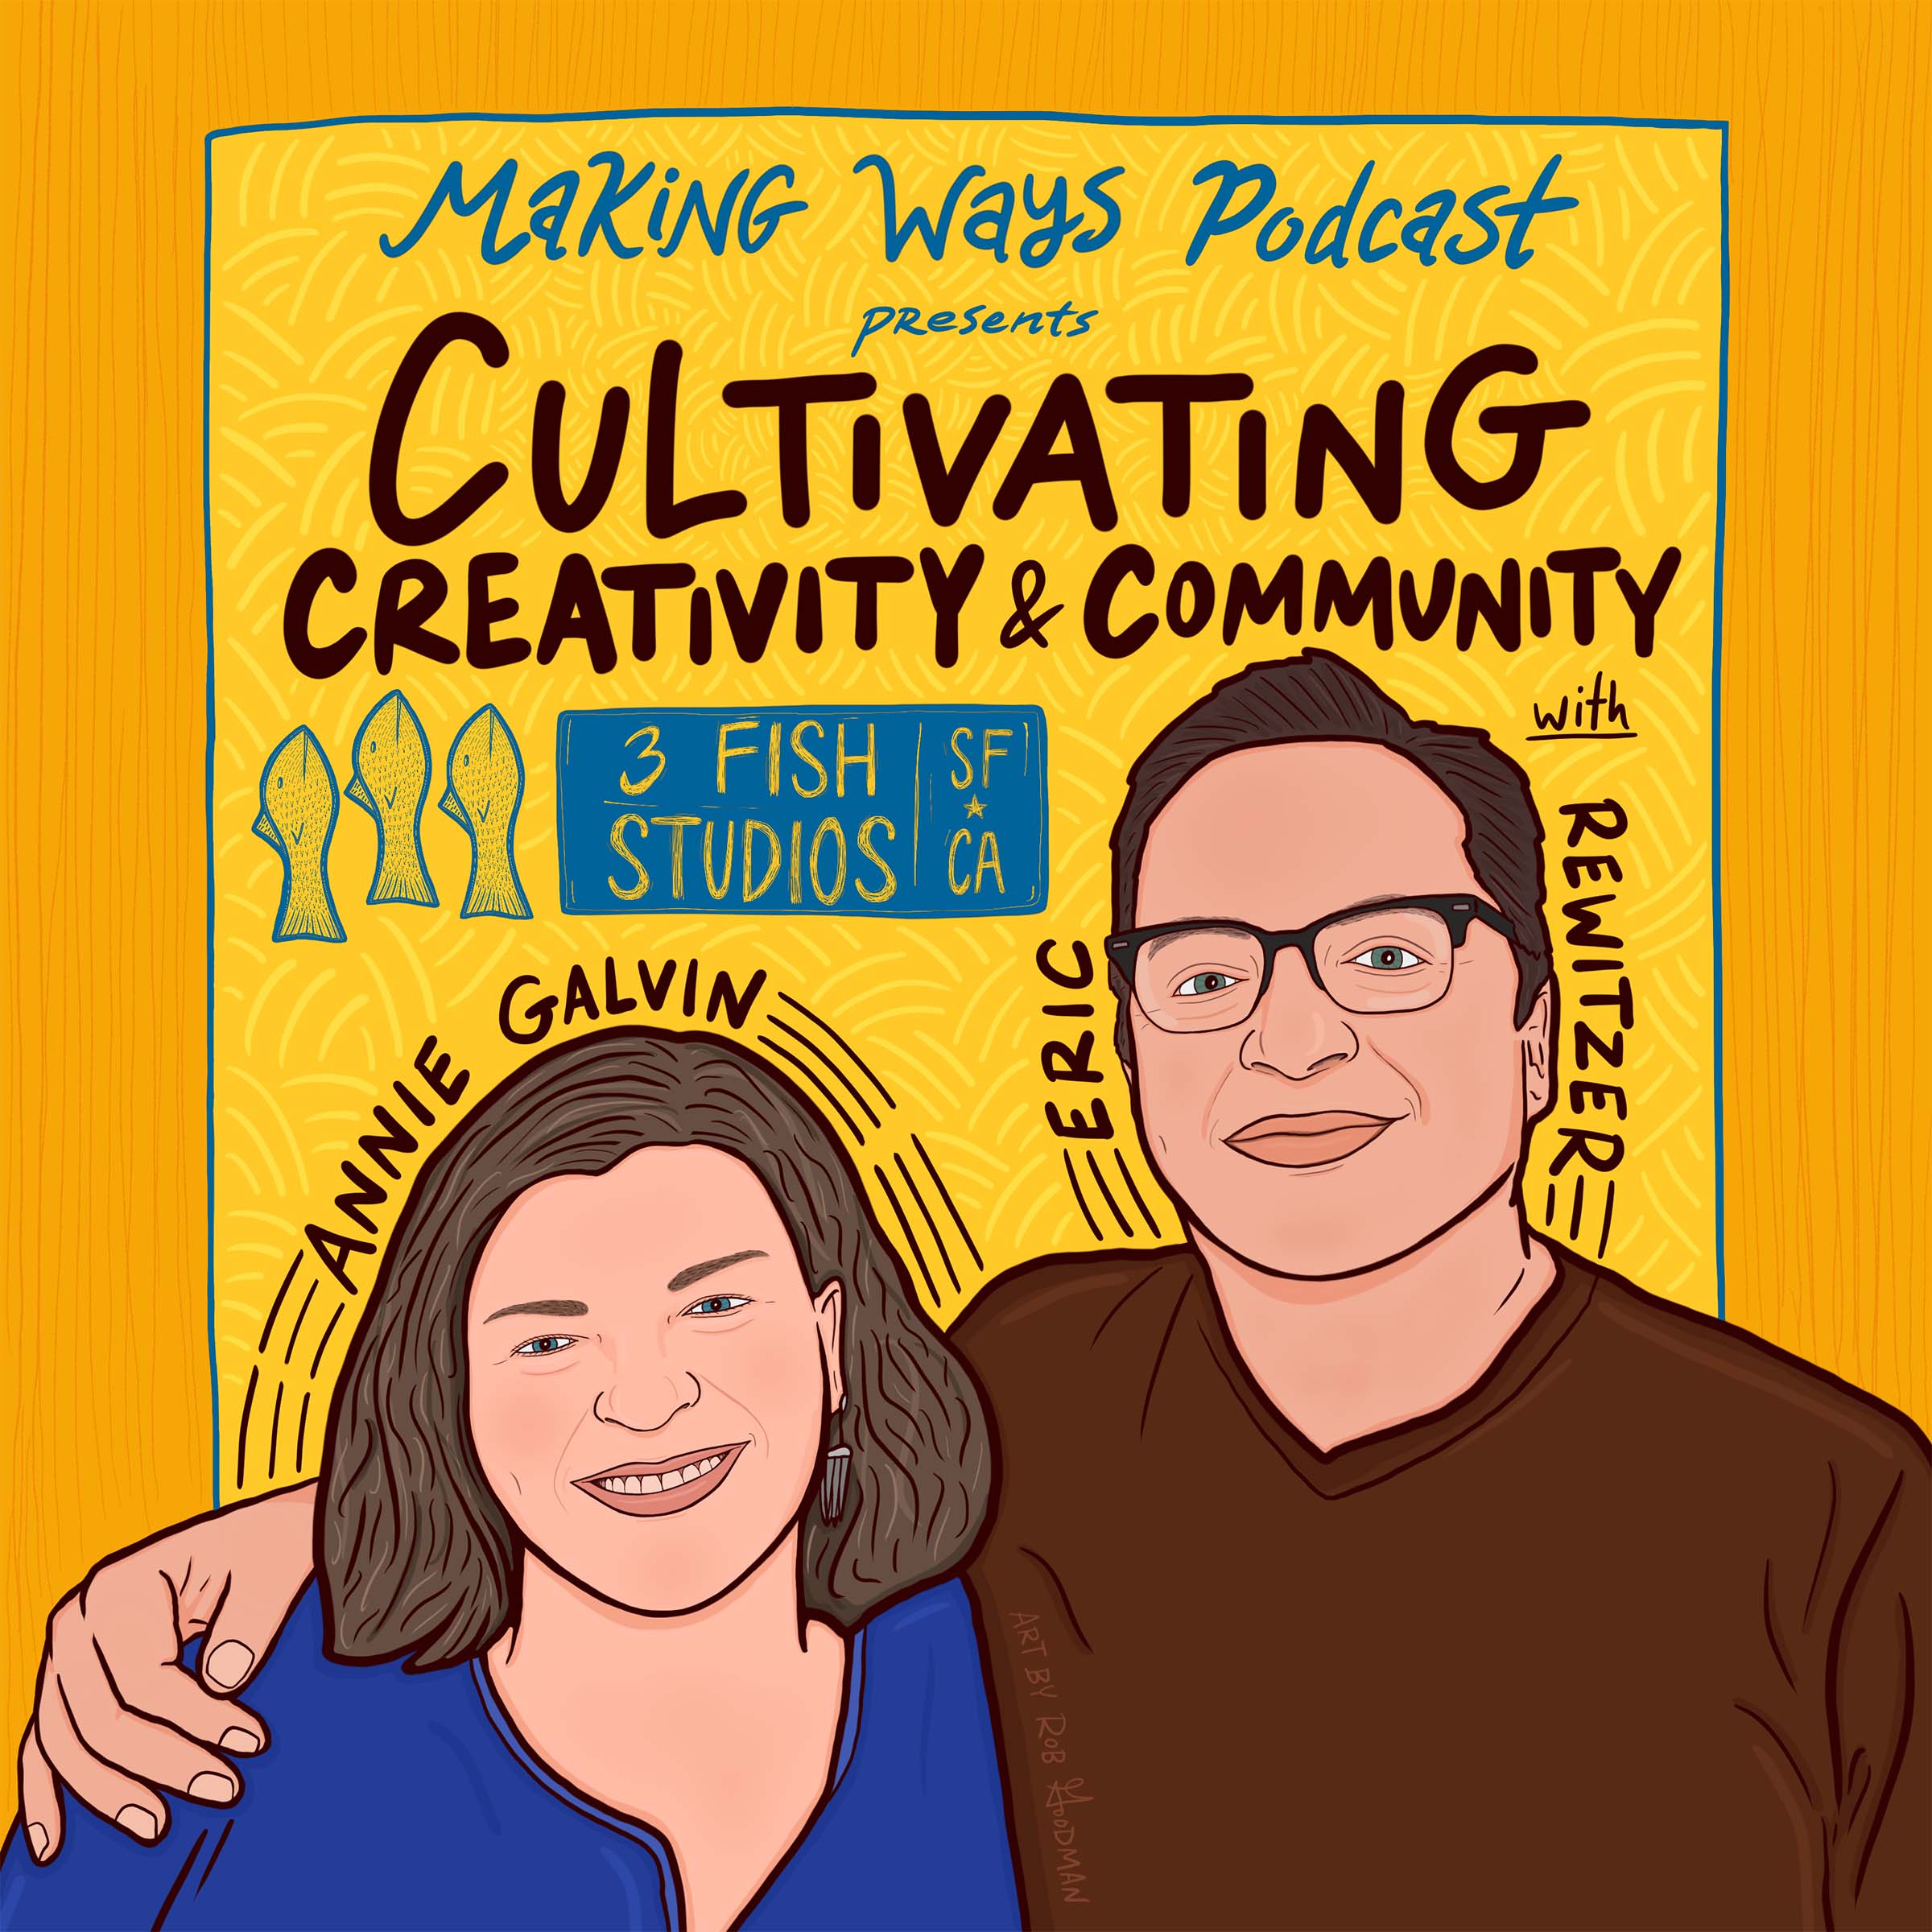 Cultivating Creativity & Community with Annie Galvin and Eric Rewitzer of 3 Fish Studios